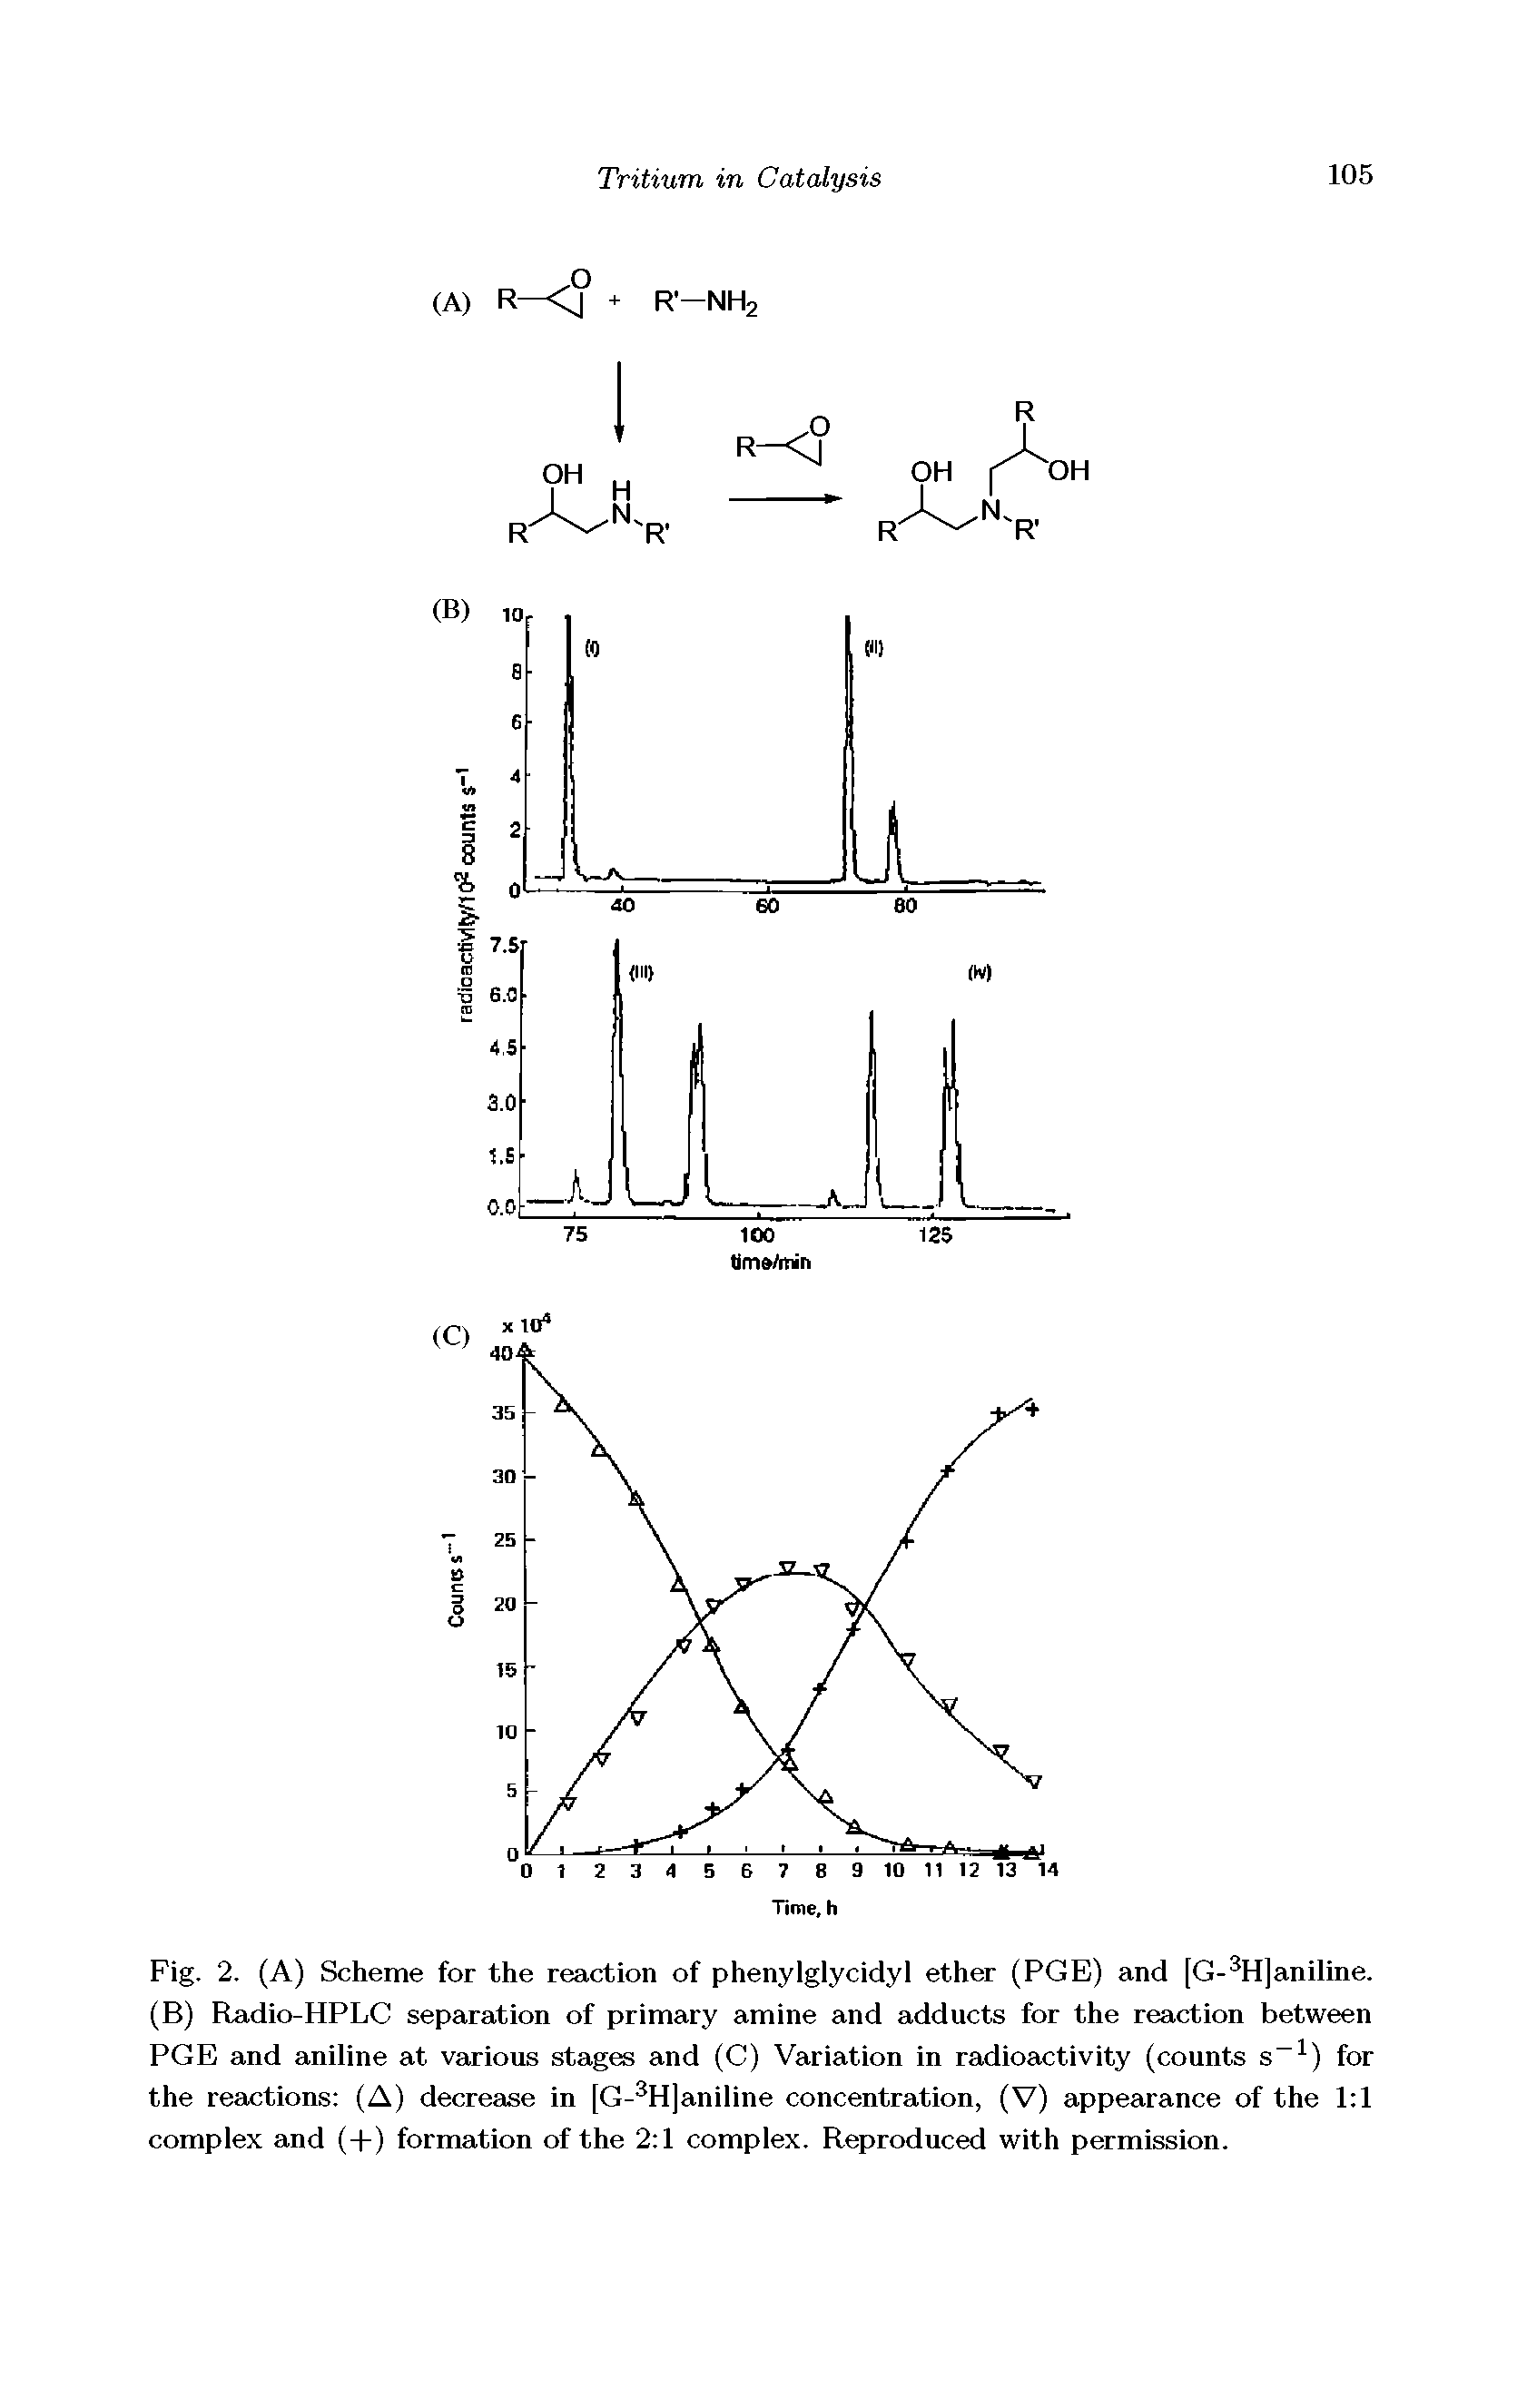 Fig. 2. (A) Scheme for the reaction of phenylglycidyl ether (PGE) and [G- H]aniline. (B) Radio-HPLC separation of primary amine and adducts for the reaction between PGE and aniline at various stages and (C) Variation in radiojictivity (counts s ) for the reactions (A) decrease in [G- H]aniline concentration, (V) appearance of the 1 1 complex and (+) formation of the 2 1 complex. Reproduced with permission.